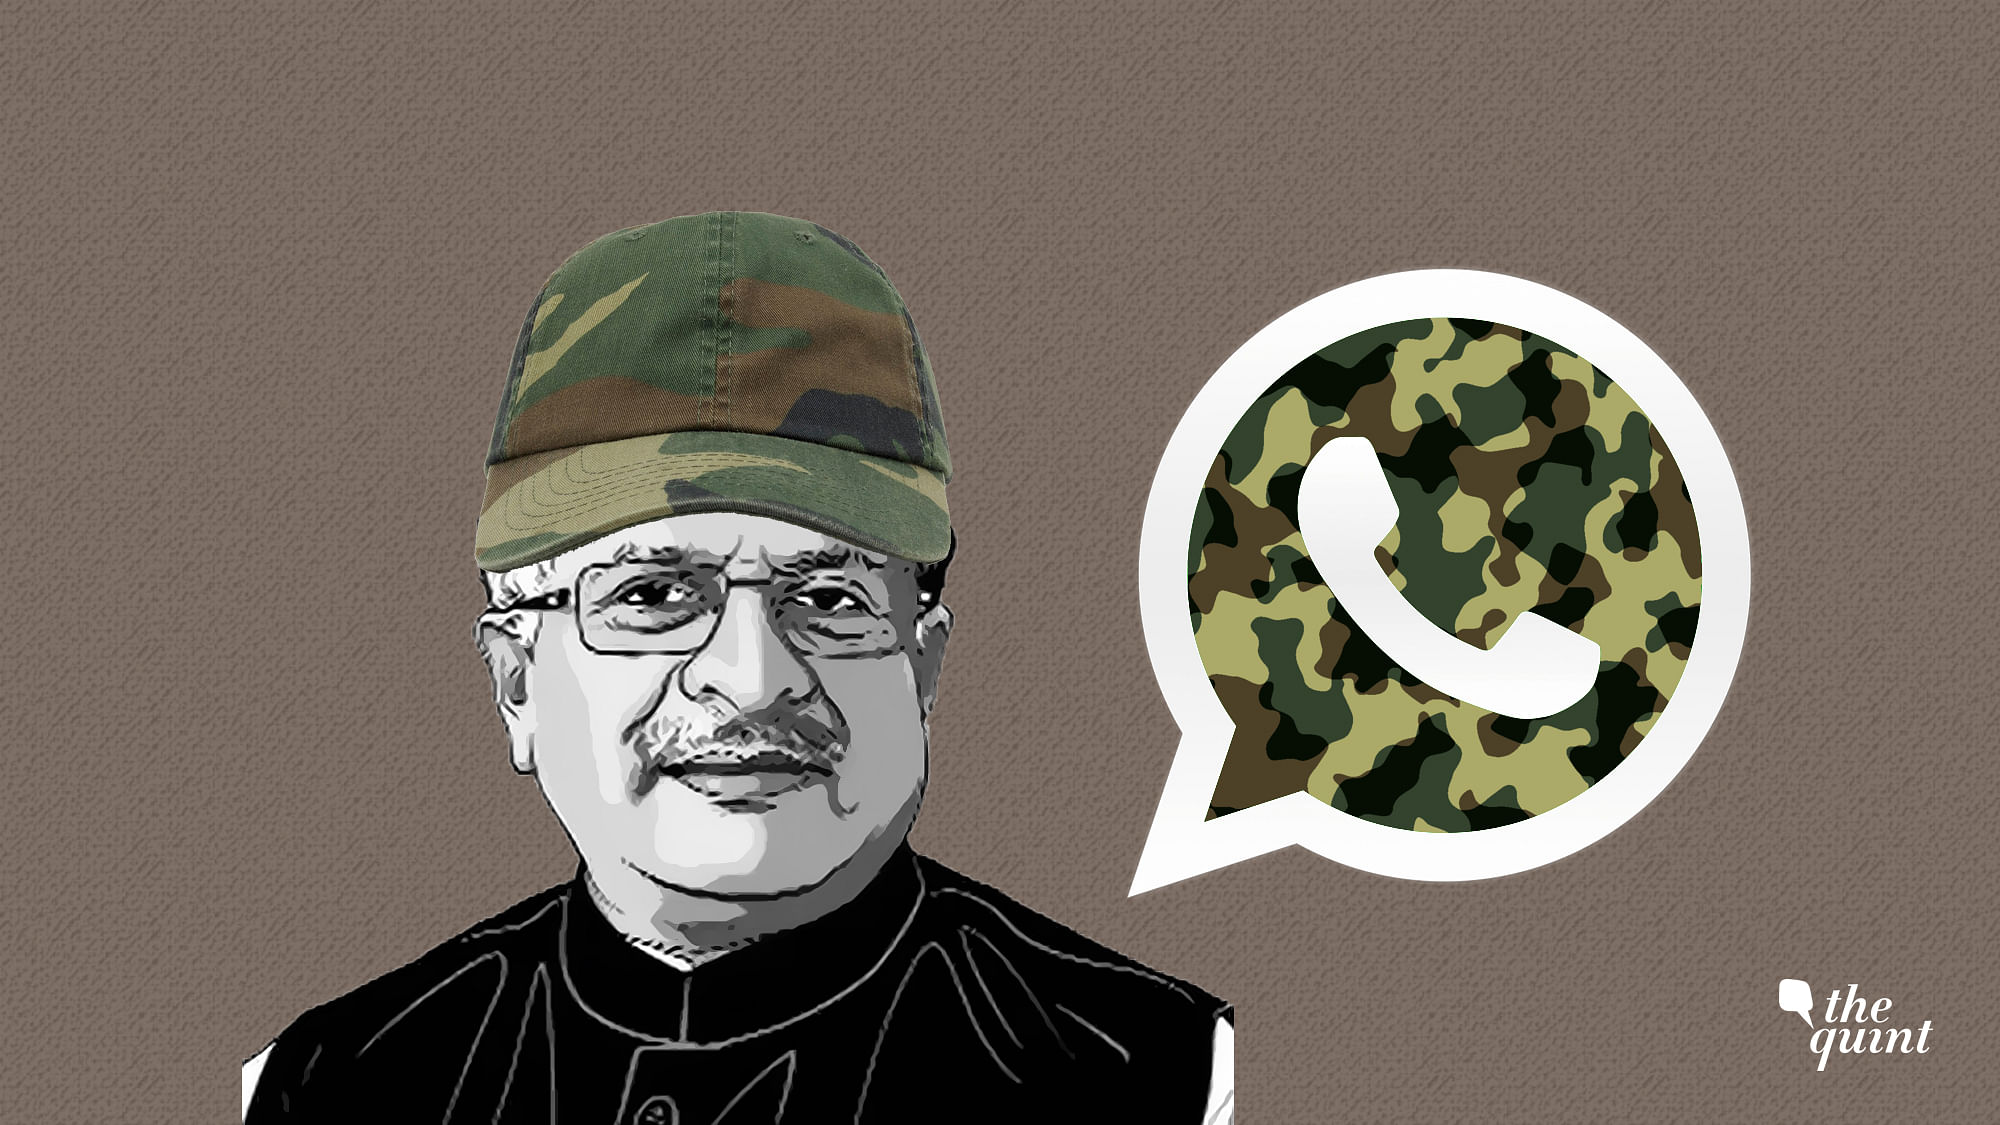 “We wrestle on Twitter. The battle is on Facebook. The war is on WhatsApp.” – Ankit Lal, a top strategist for the Aam Aadmi Party is famously quoted as saying.&nbsp;